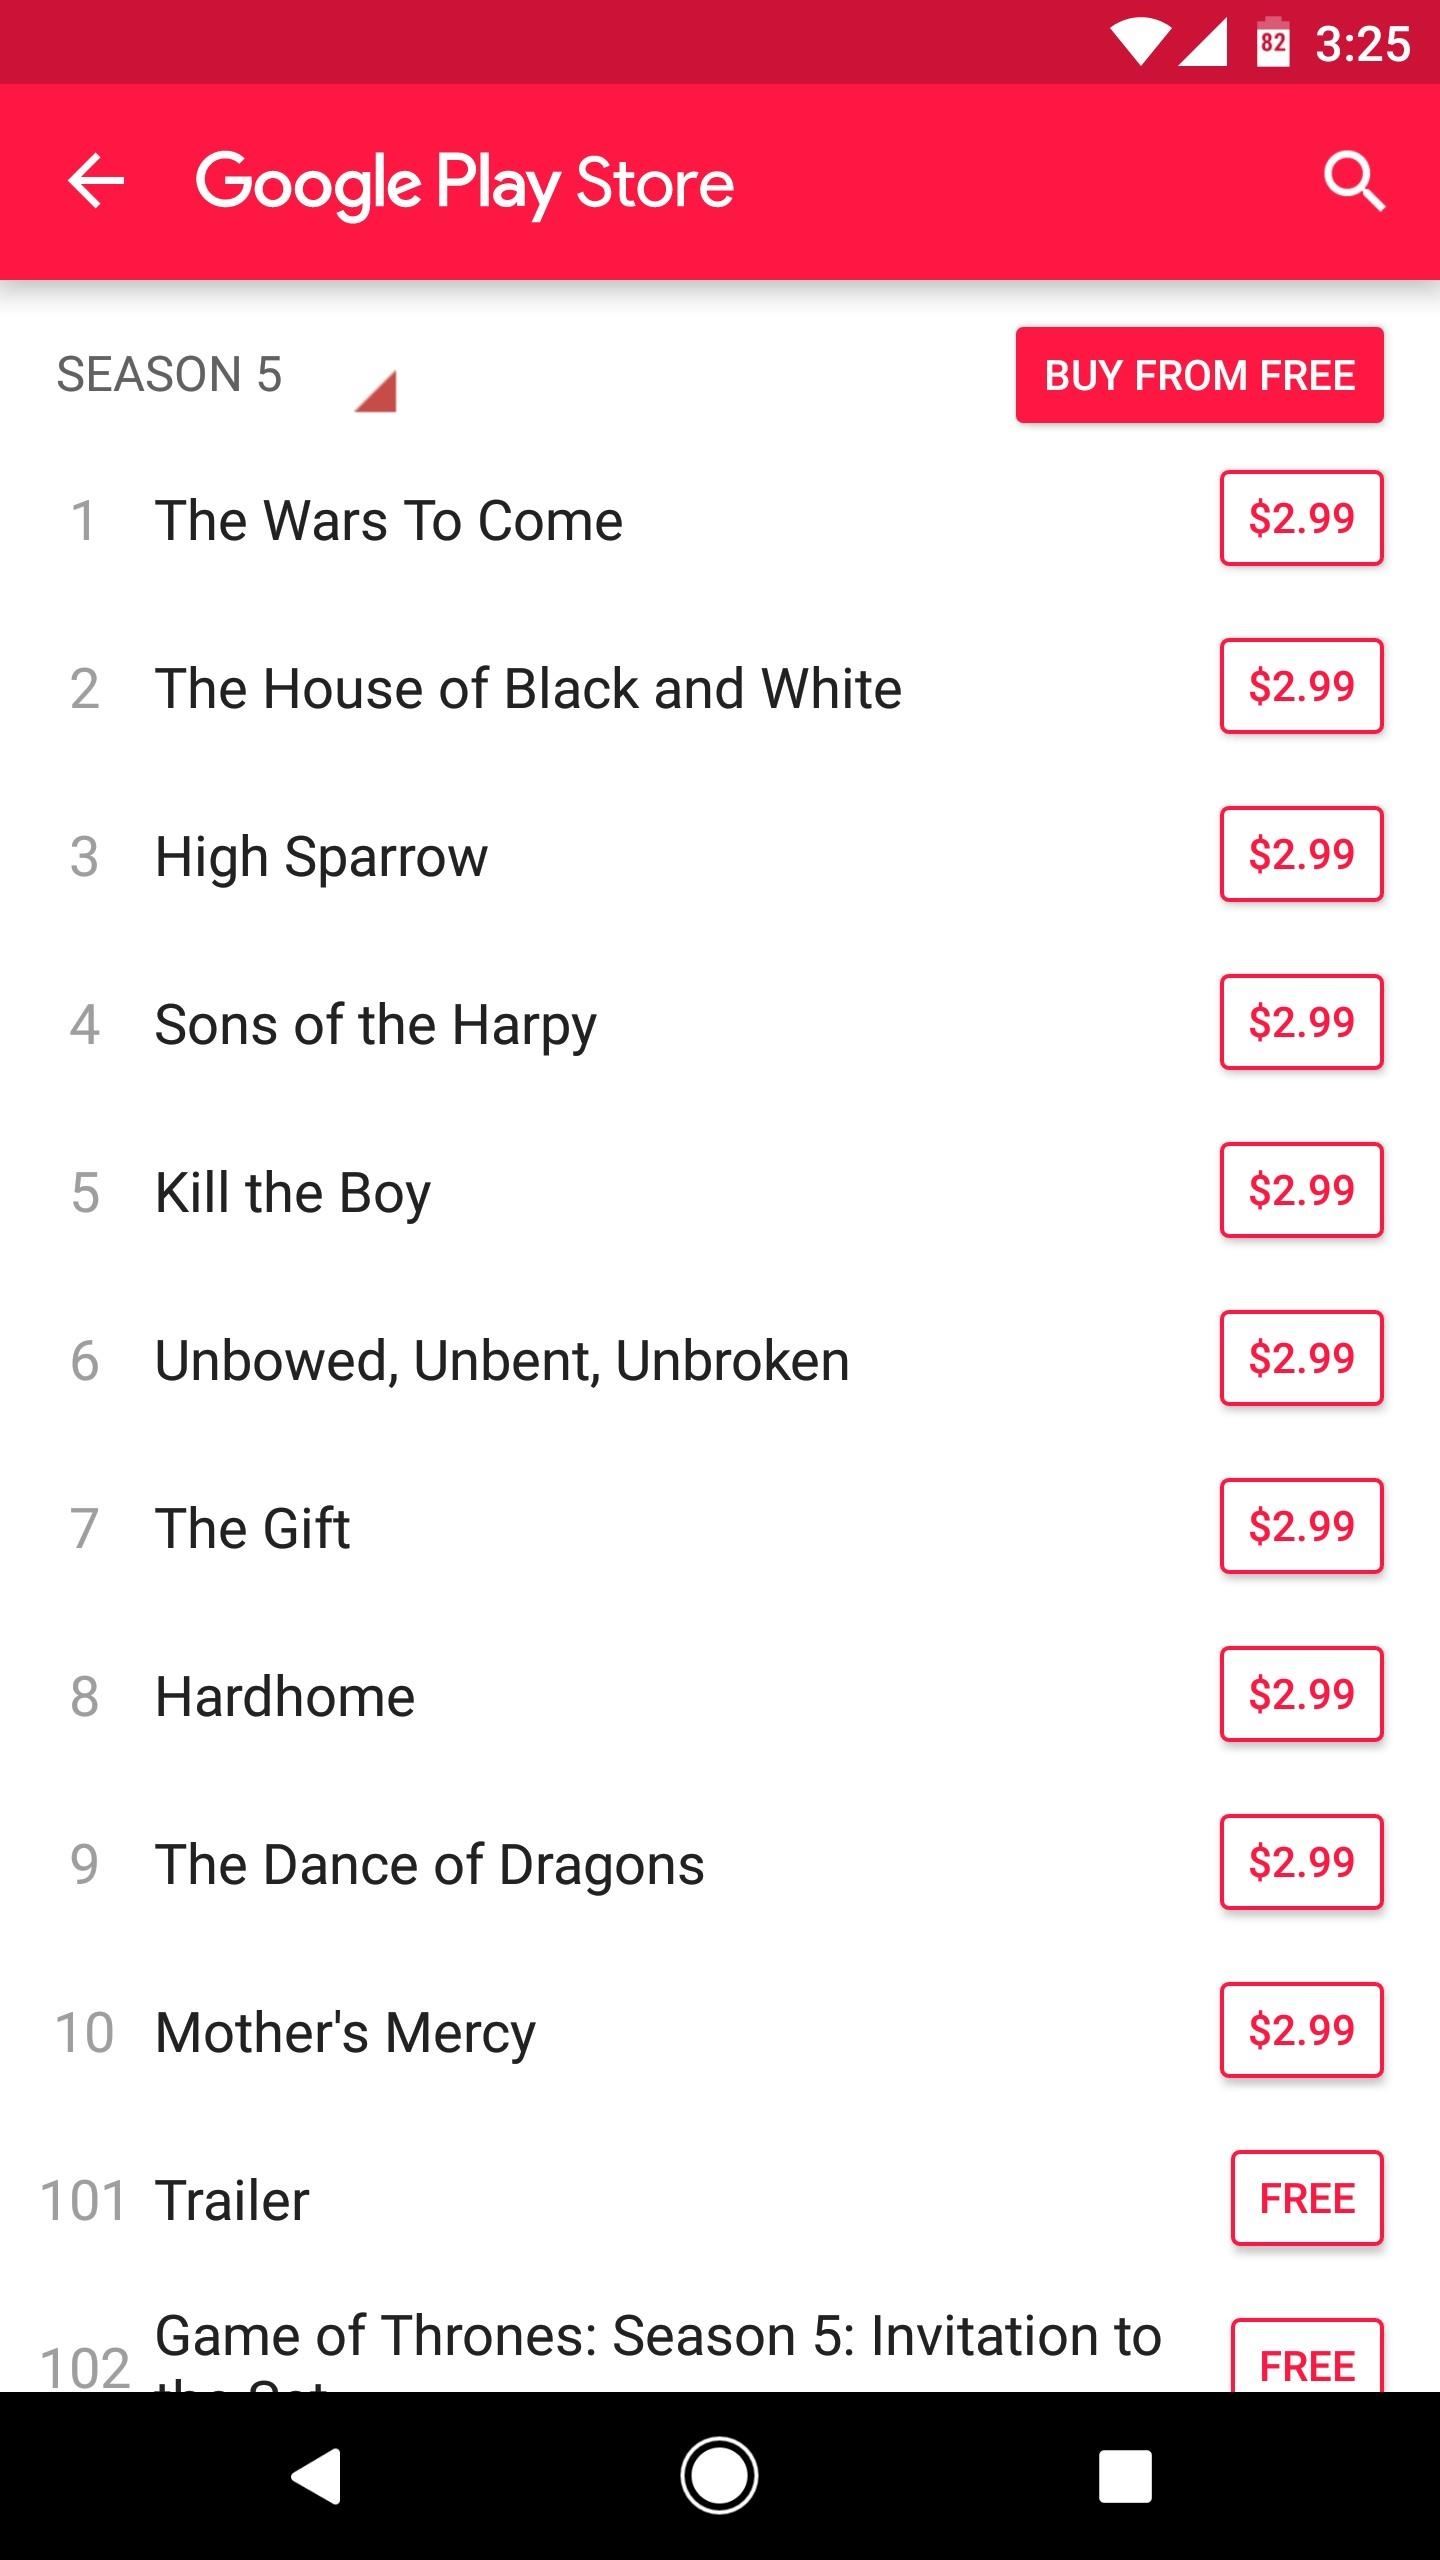 Deal Alert: Get a Free Season of Game of Thrones from Google Play—Right Now!